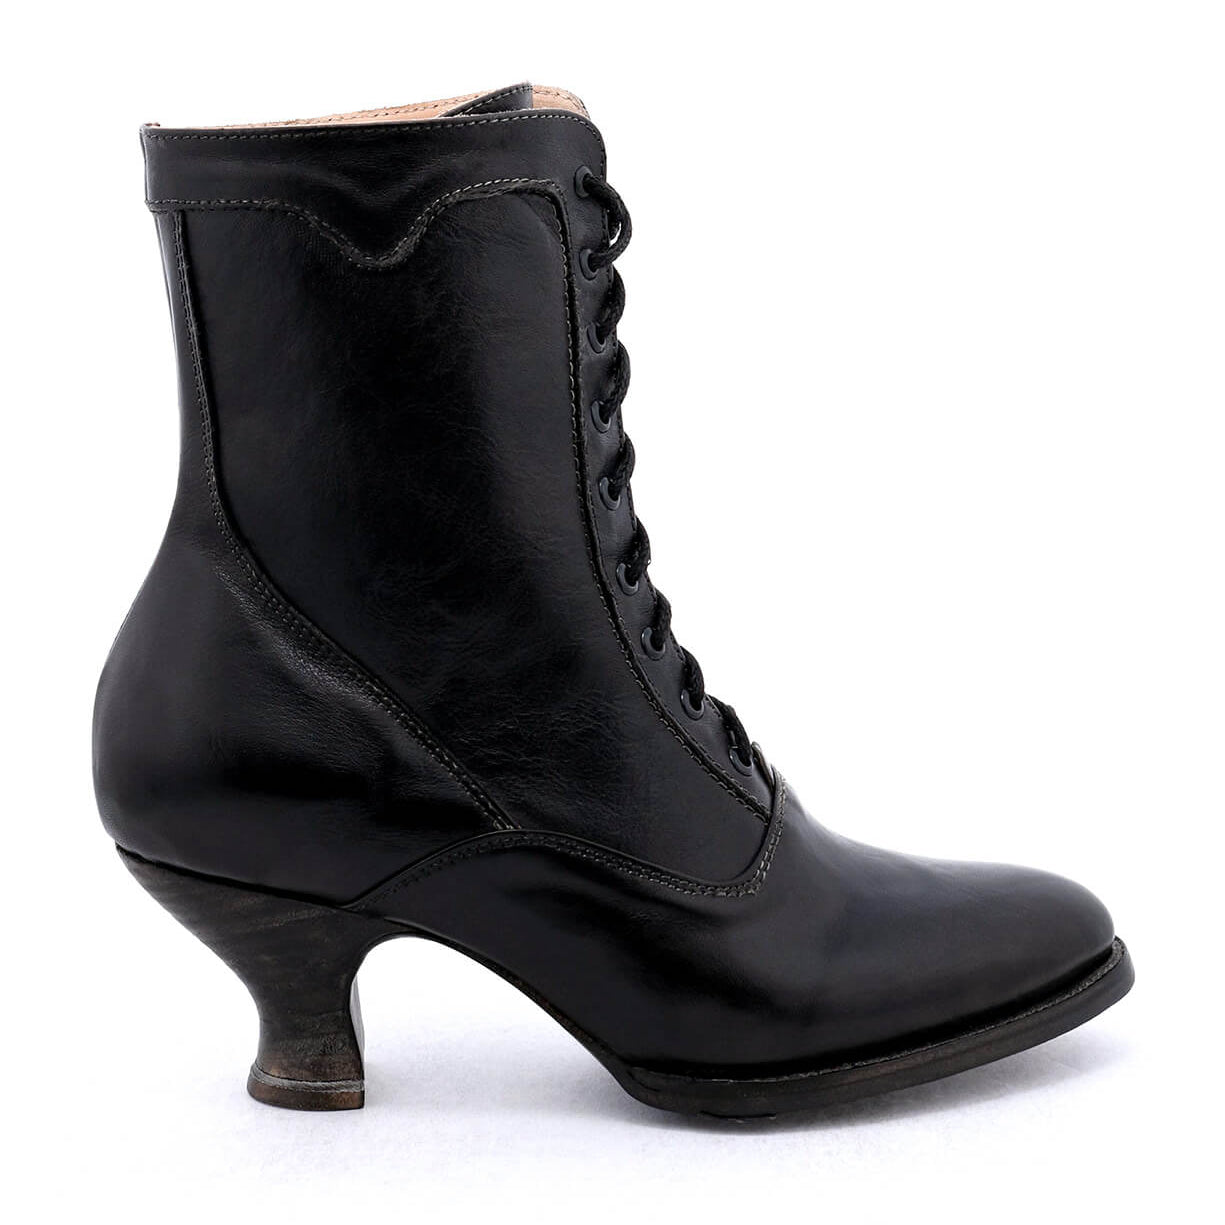 An Eleanor women's black ankle boot with a Victorian style and wooden heel, made by Oak Tree Farms.